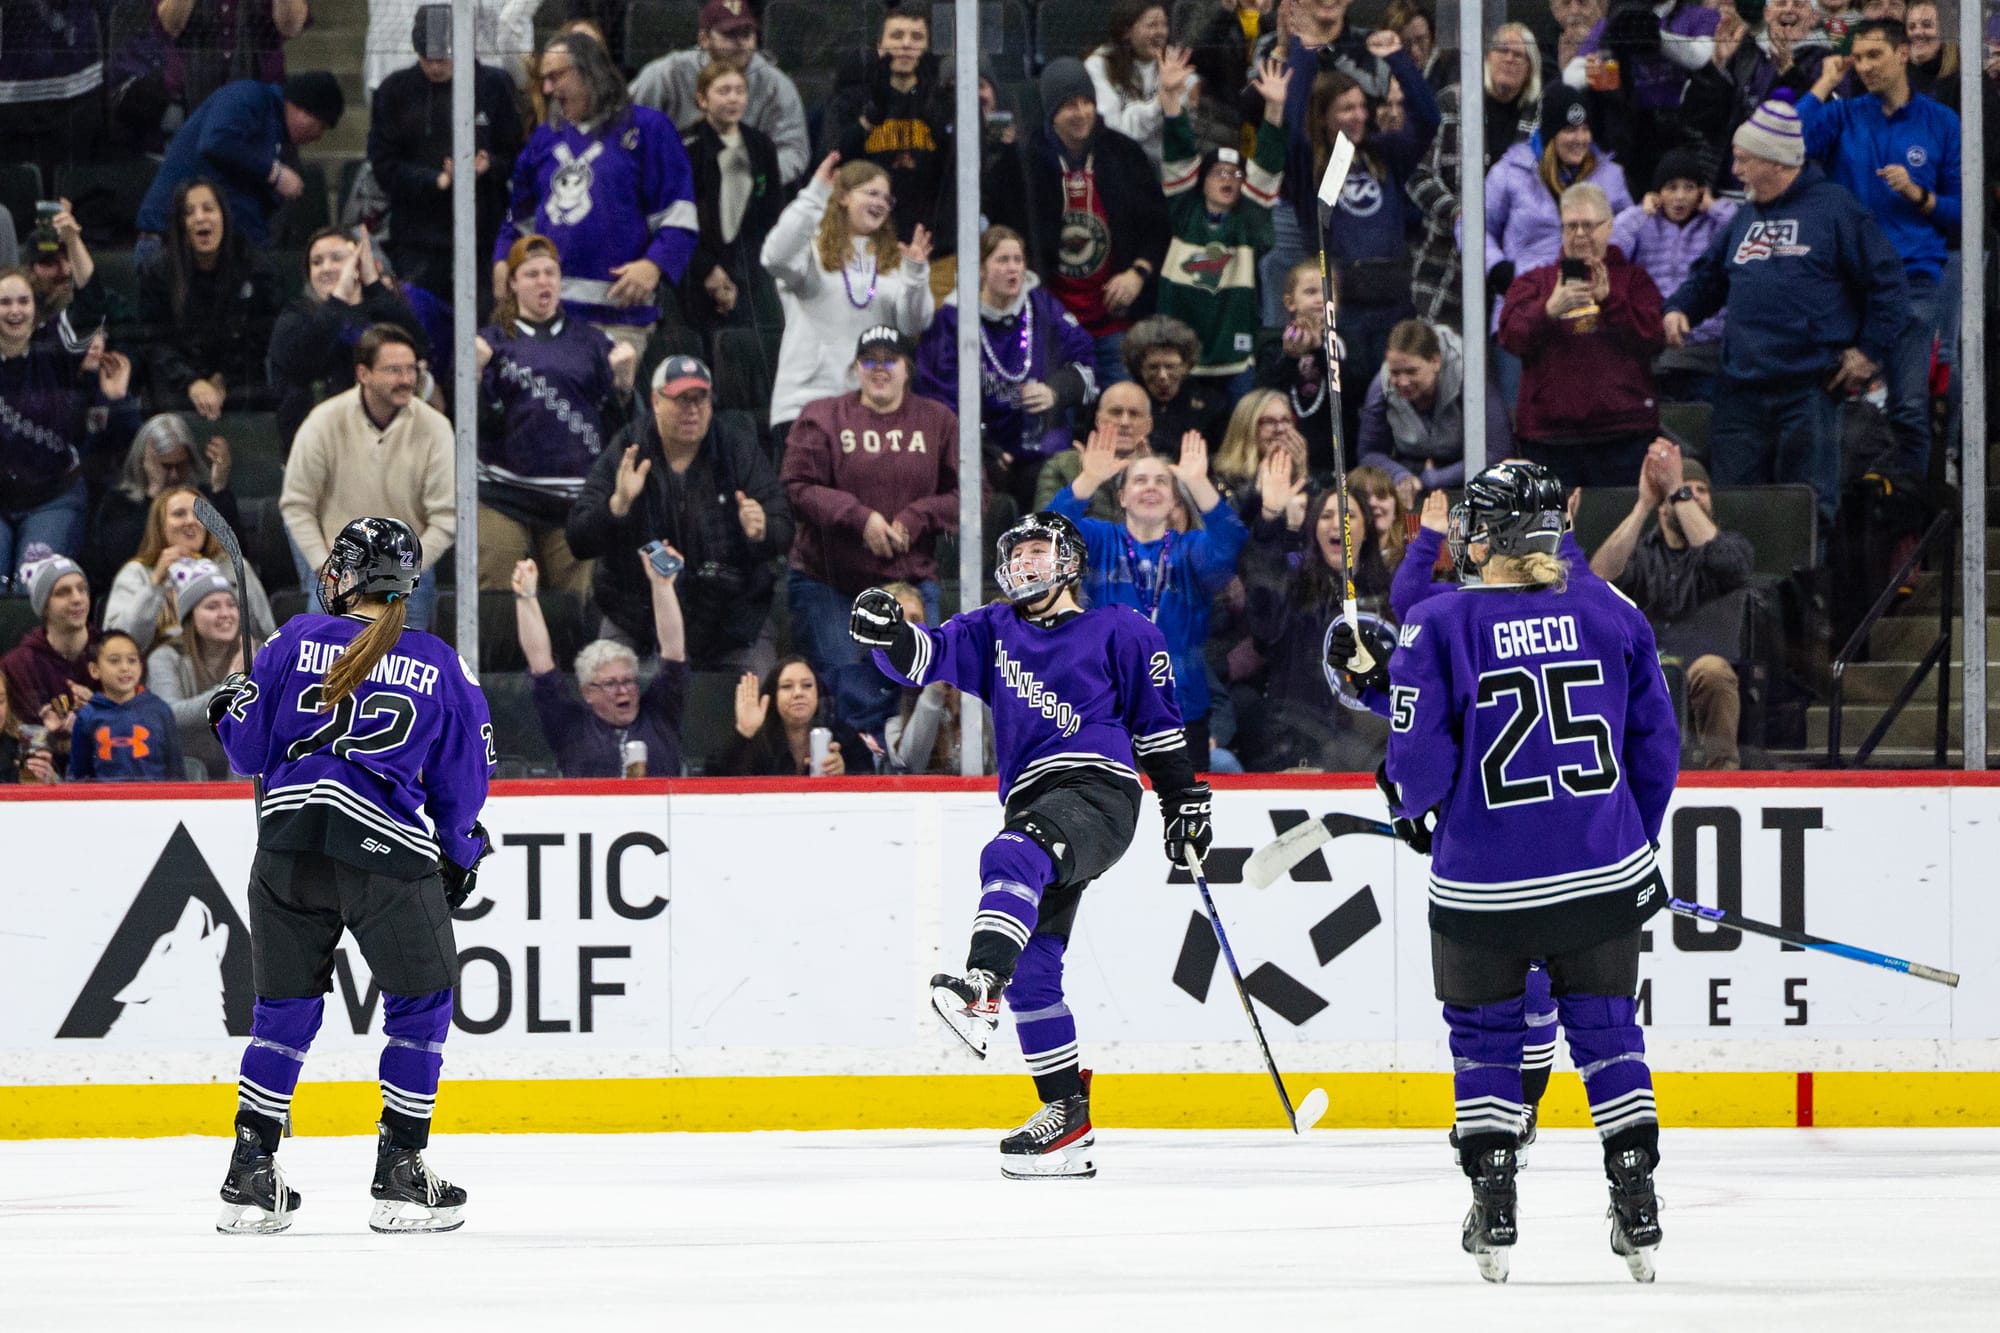 Abbey Boreen celebrates her goal against Ottawa. She has one leg in the air as she points at Natalie Buchbinder while Emma Greco looks on. All players are wearing purple home jerseys.